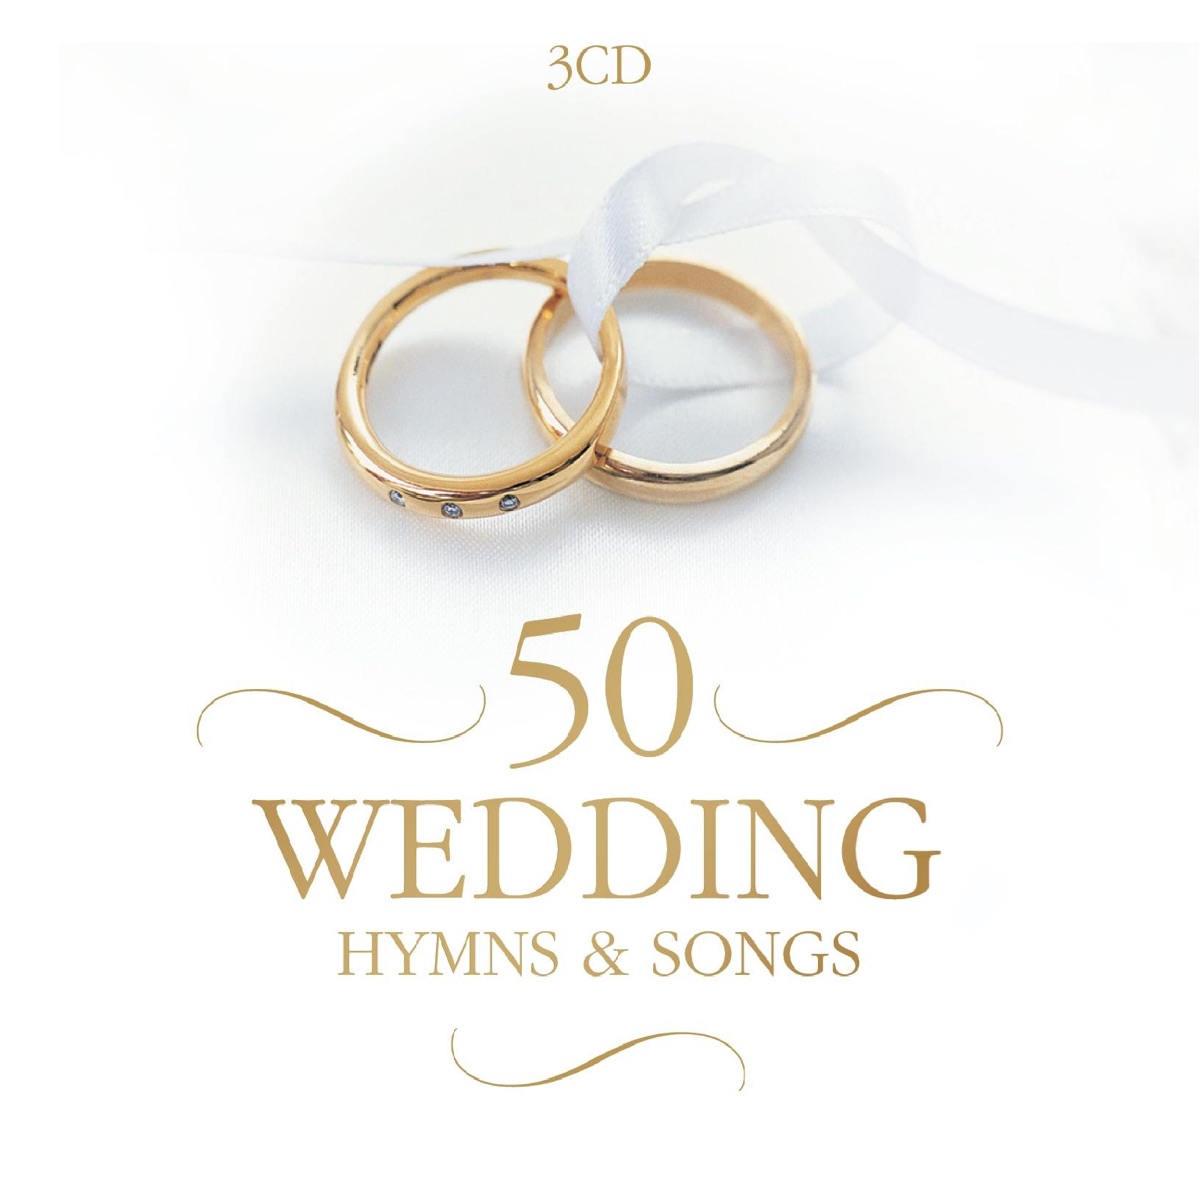 50 Wedding Hymns & Songs - Album by Various Artists - Apple Music